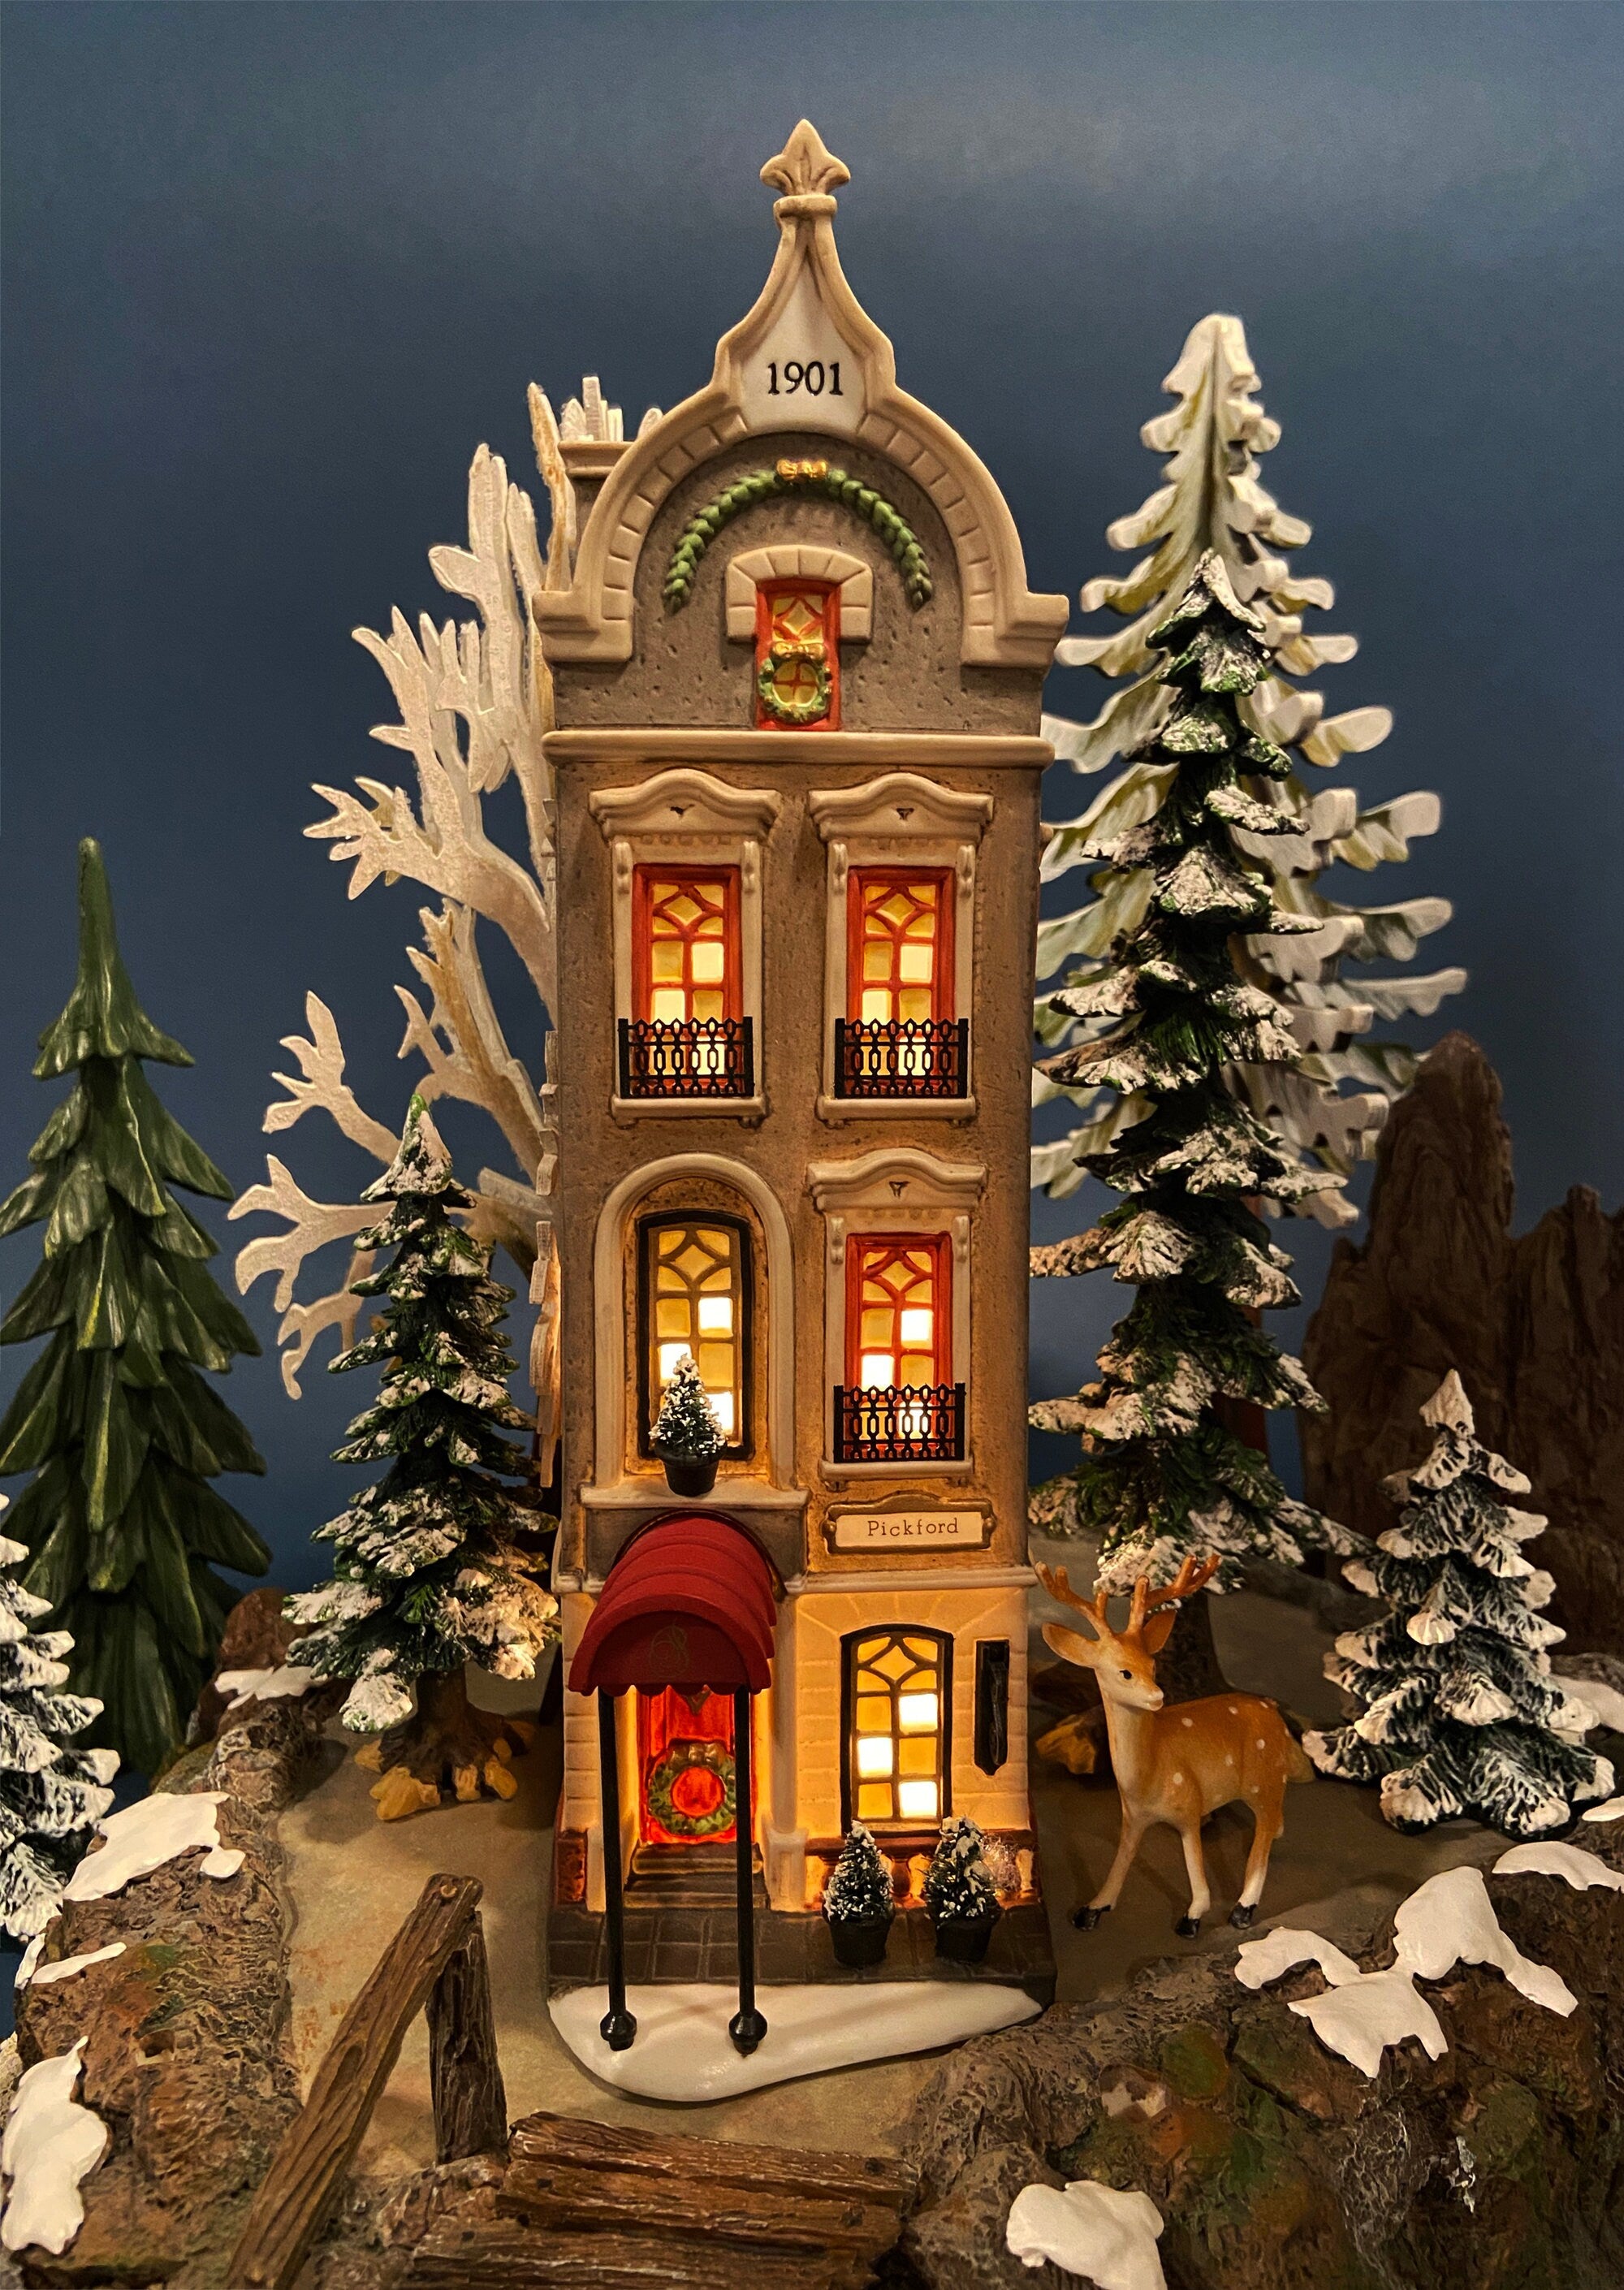 The City Globe Publishing by Department 56. Illuminated Christmas Village  House. Christmas in the City Series. Hand-Painted Porcelain.